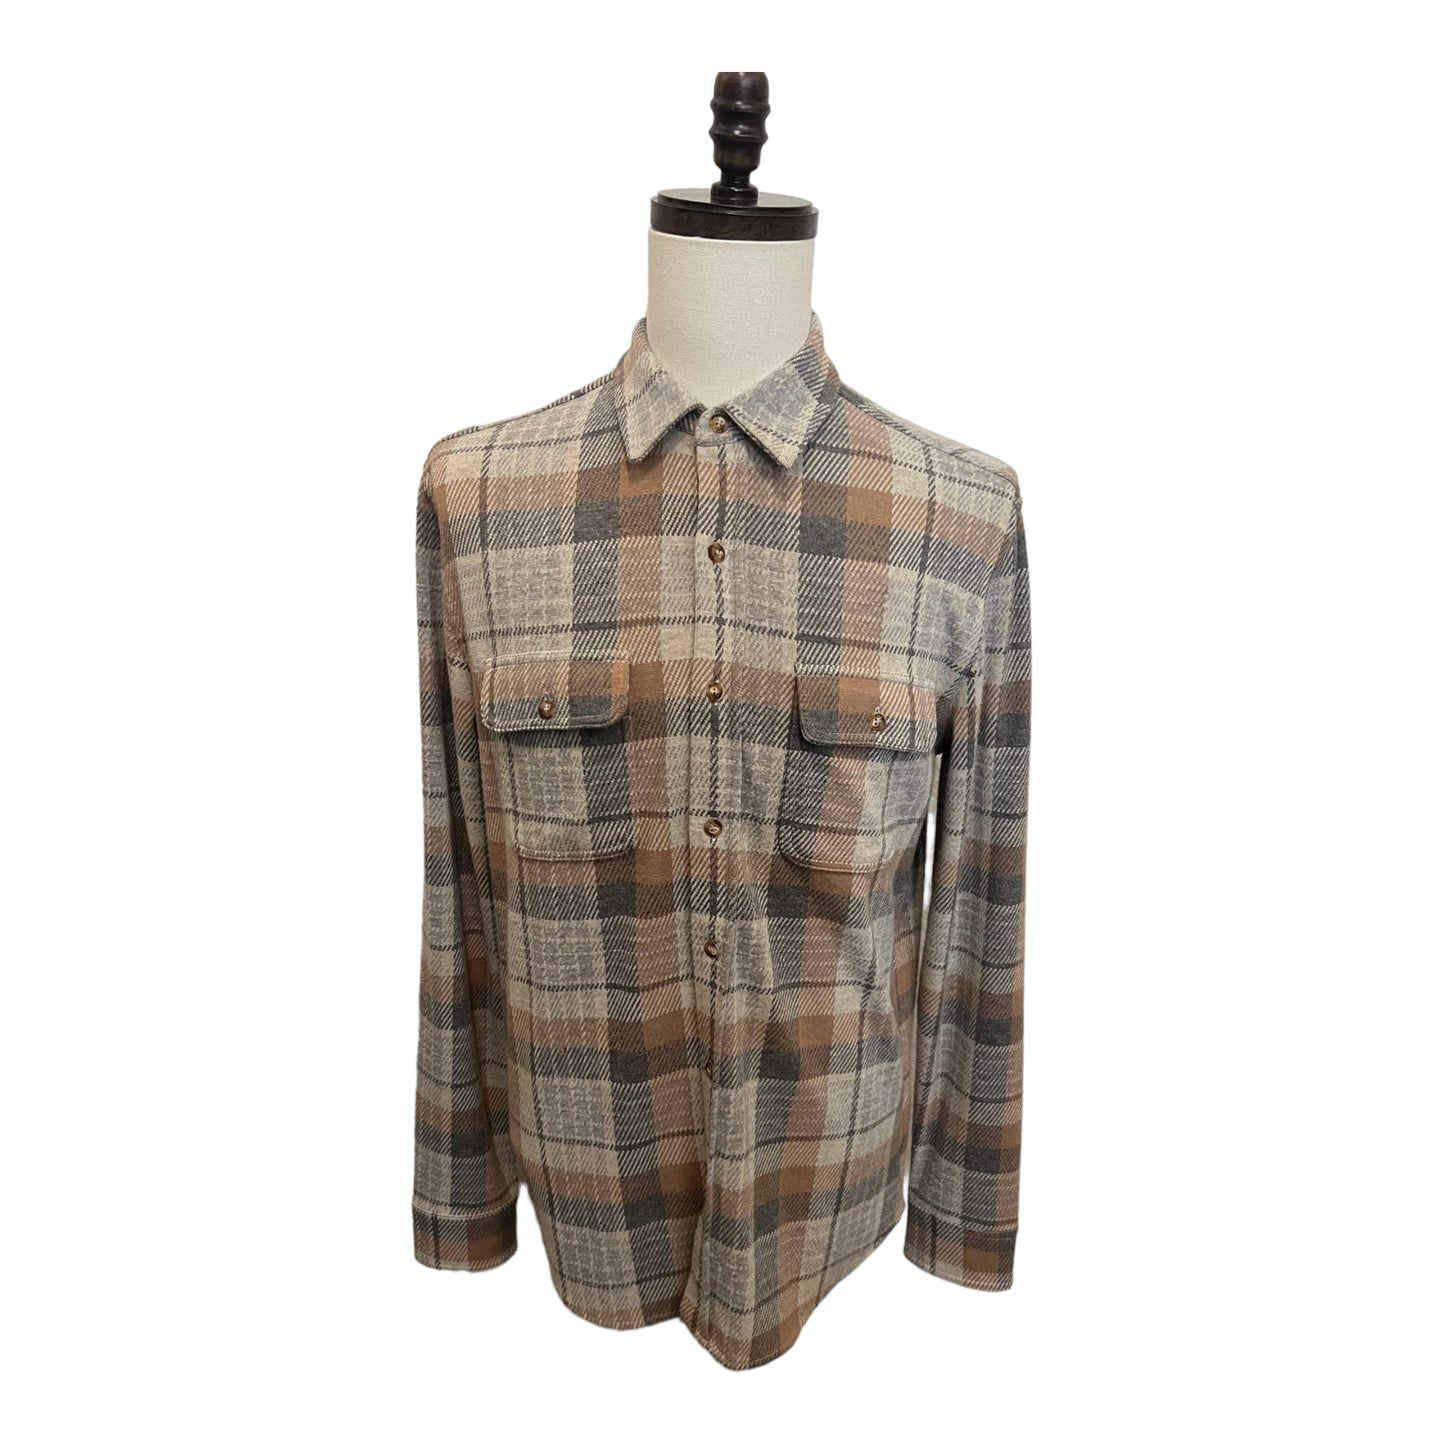 Faherty Legend Sweater Shirt-Western Outpost Plaid